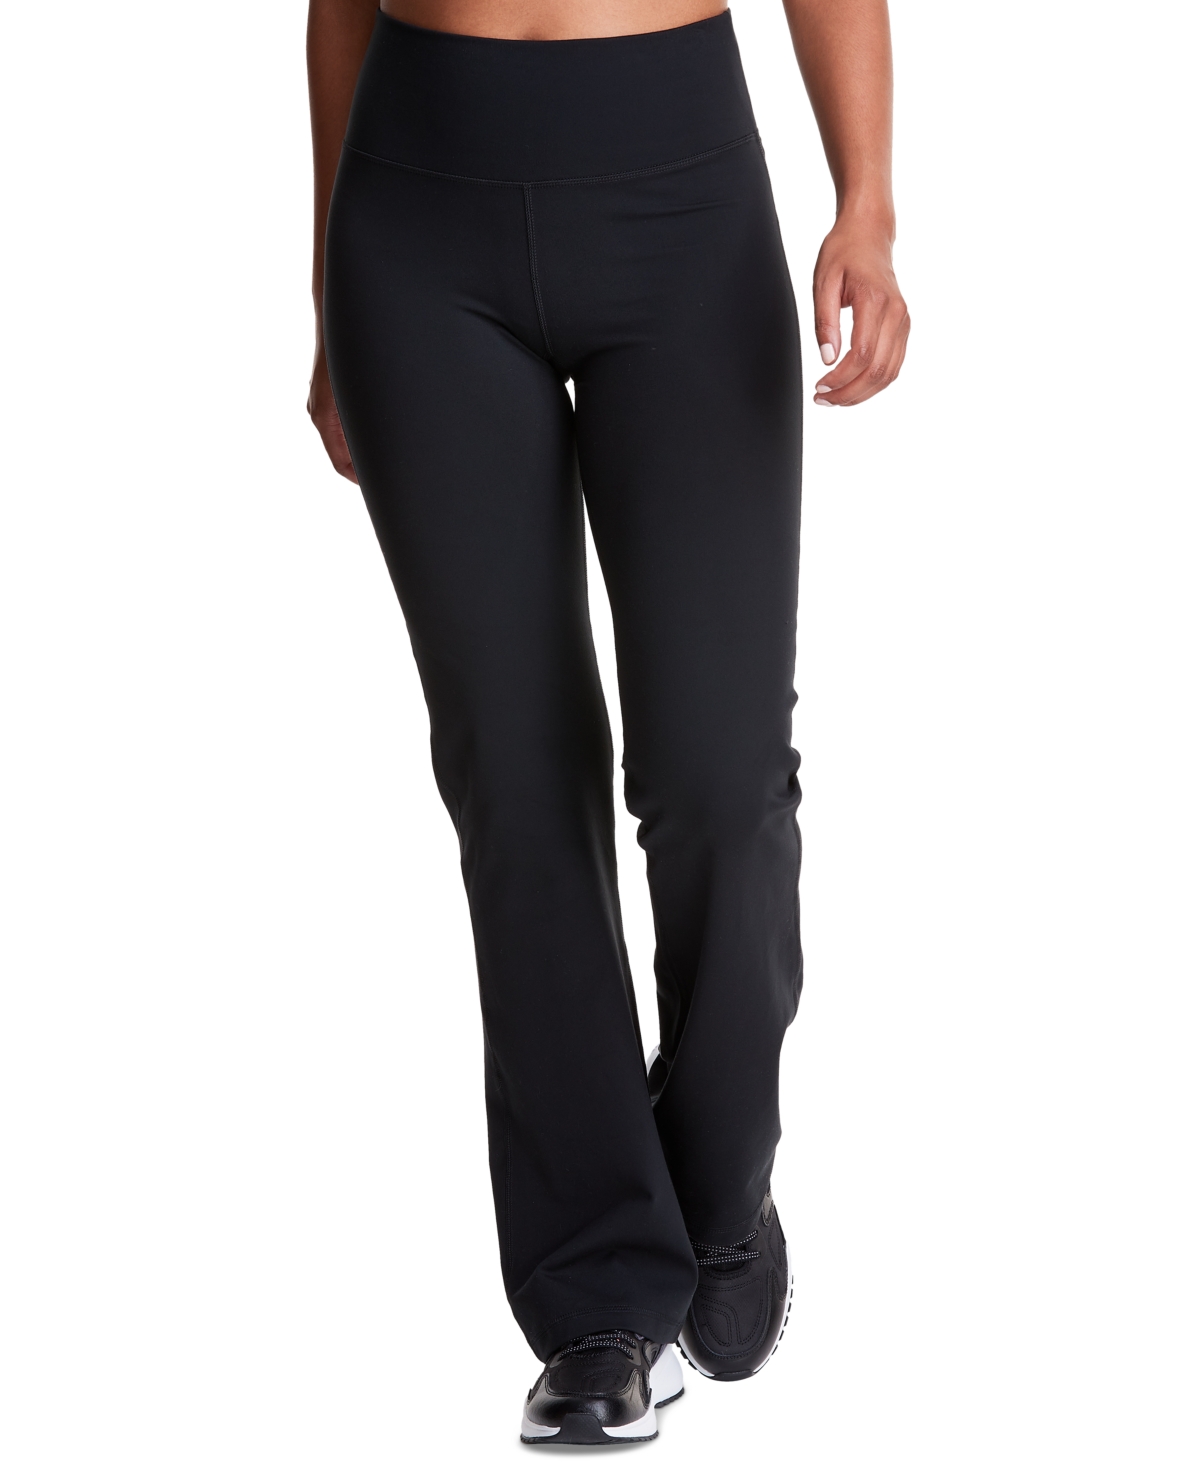 Champion Women's Soft Touch Pull-On Pants